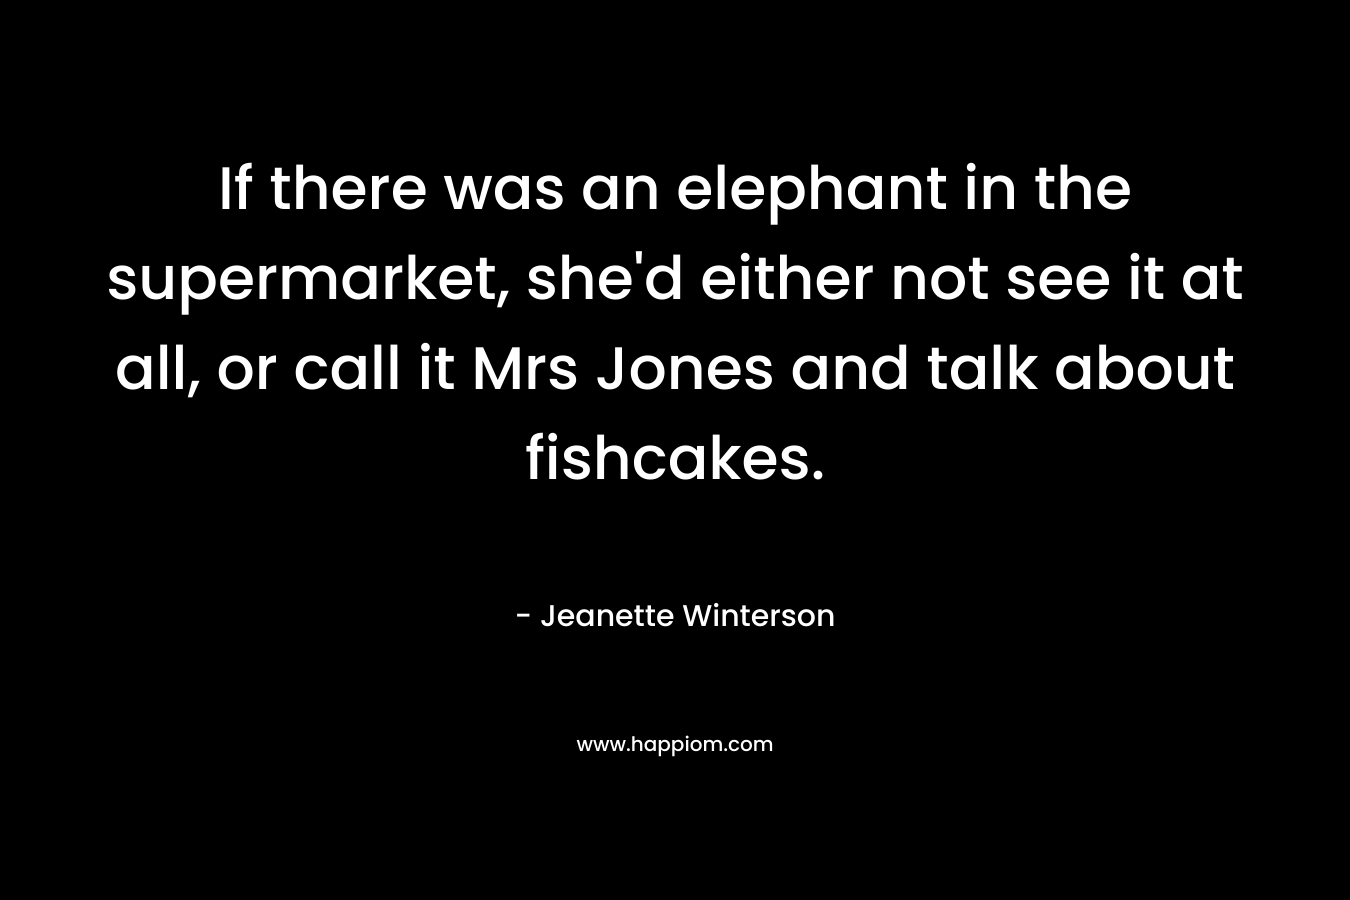 If there was an elephant in the supermarket, she’d either not see it at all, or call it Mrs Jones and talk about fishcakes. – Jeanette Winterson